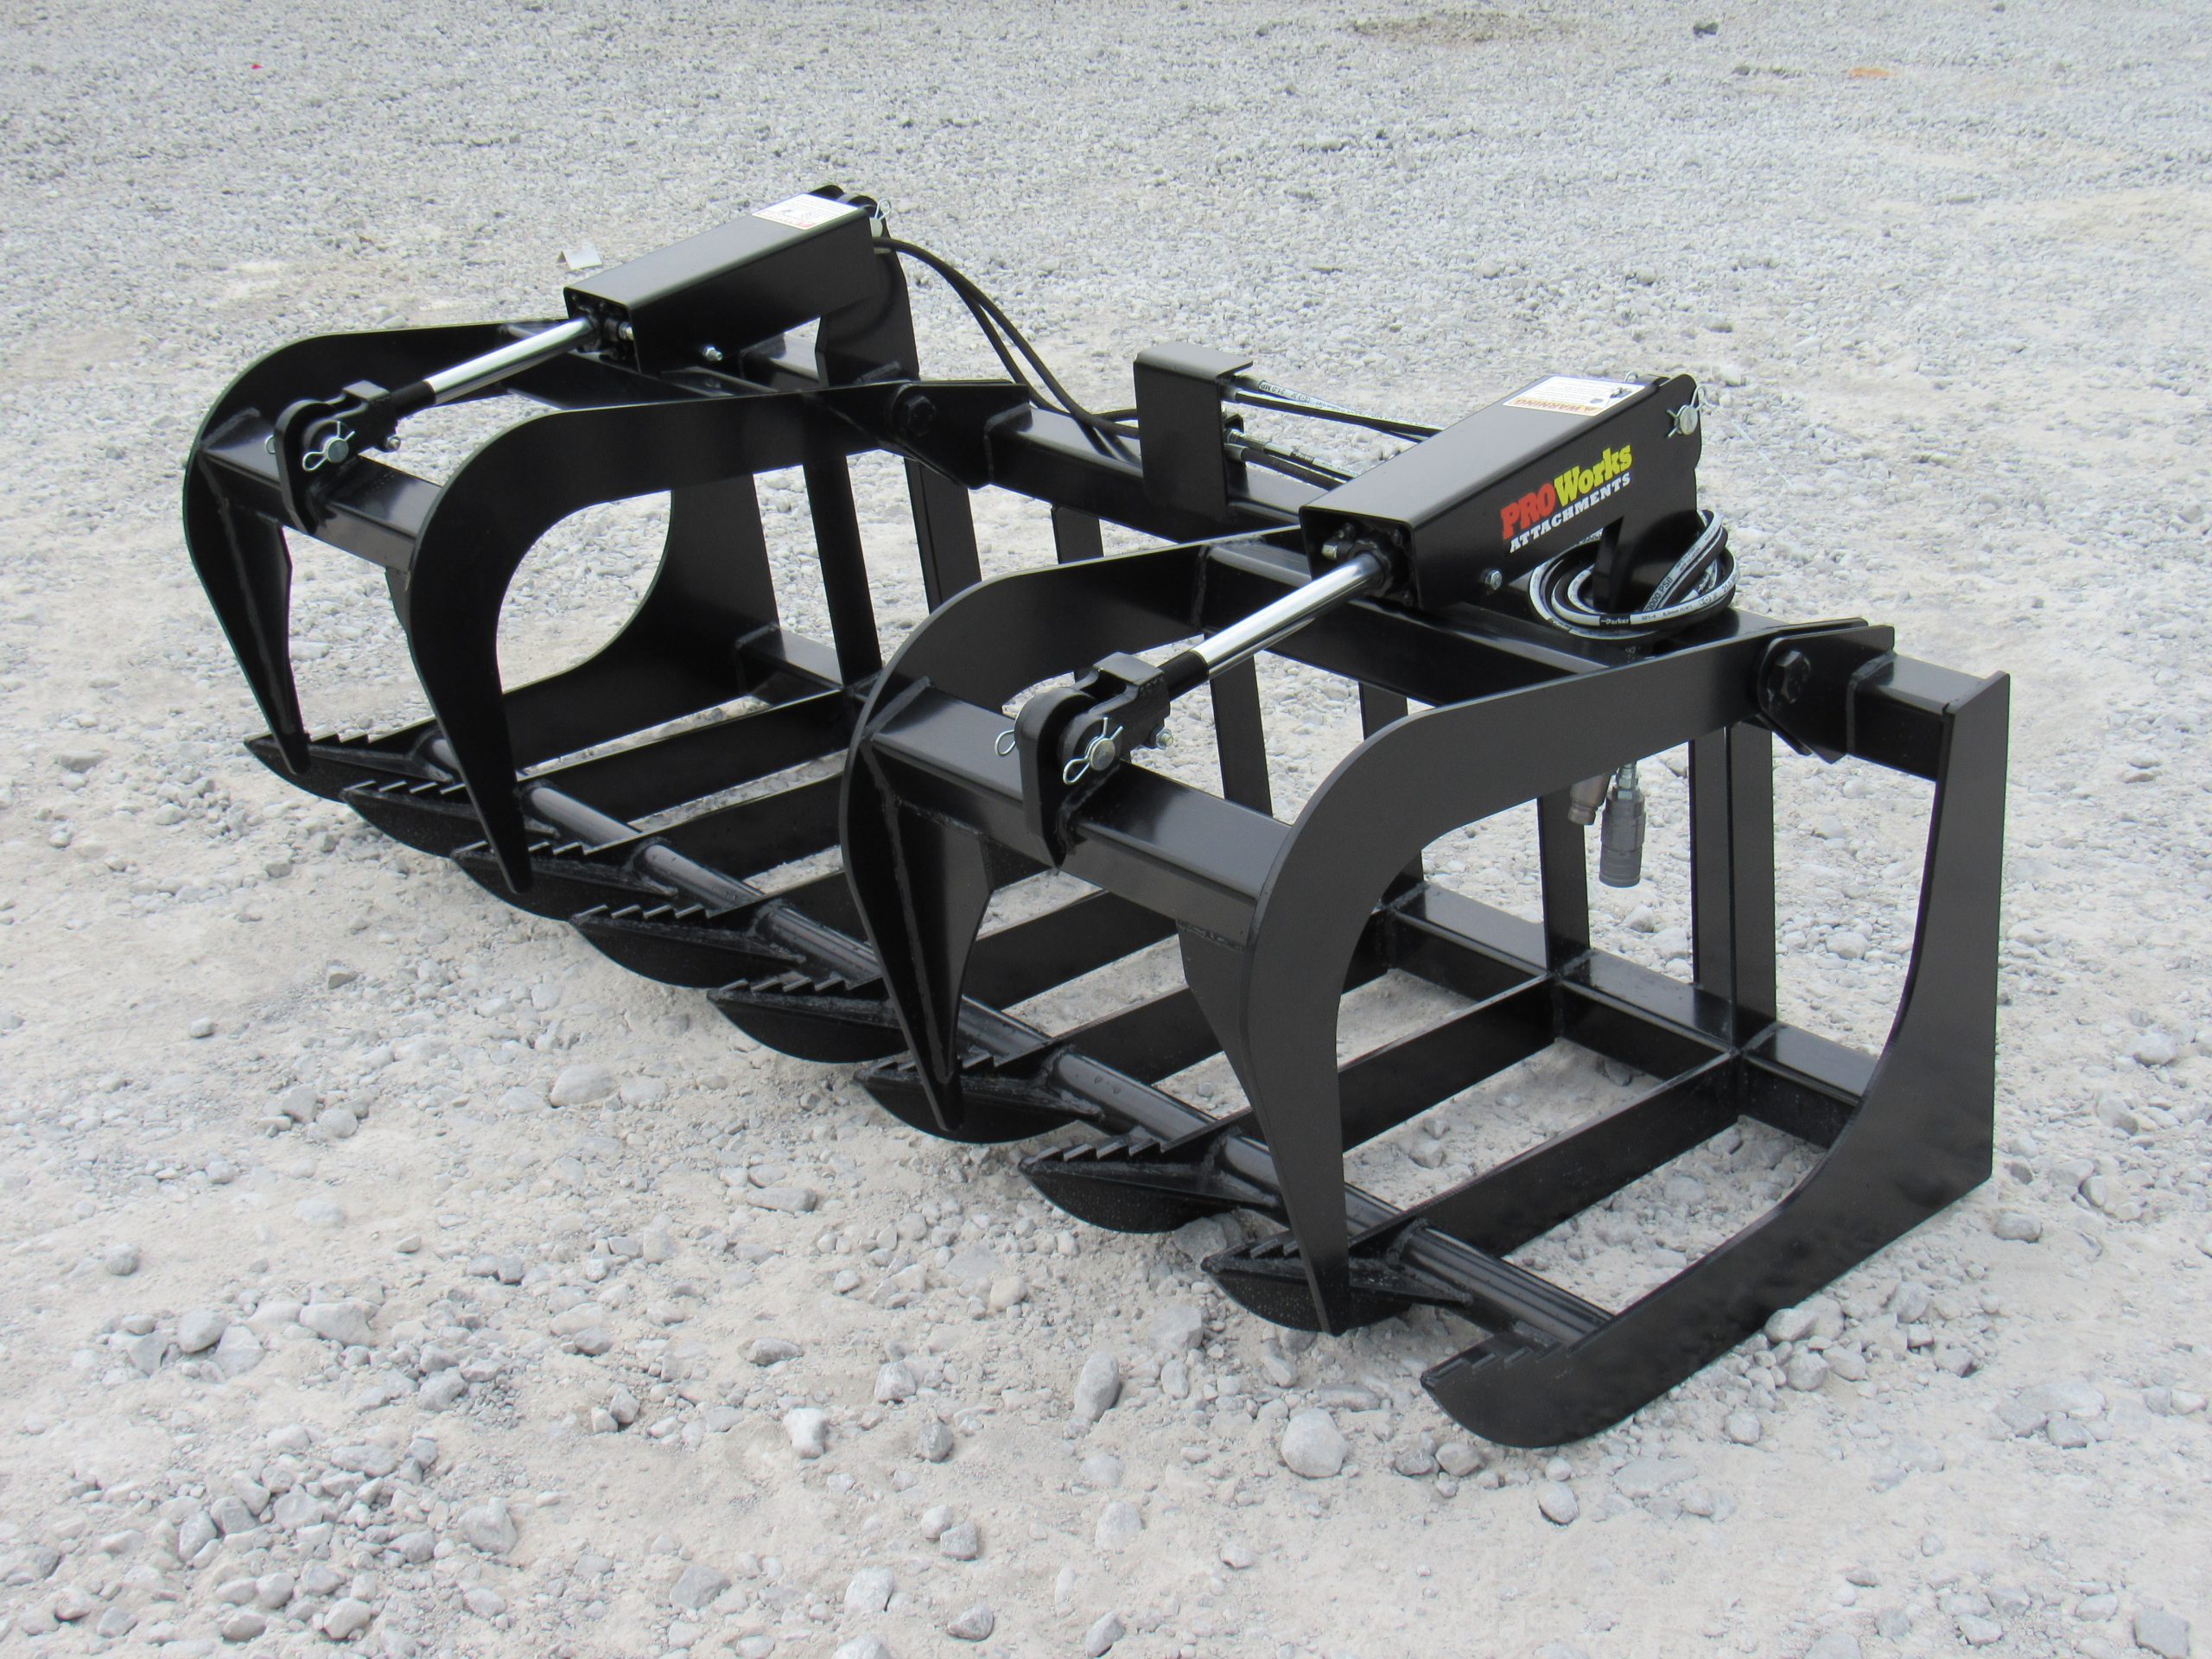 72" HD ROOT GRAPPLE FITS BOBCAT AND ALL SKIDSTEER WITH QUICK ATTACH HOOK-UP 